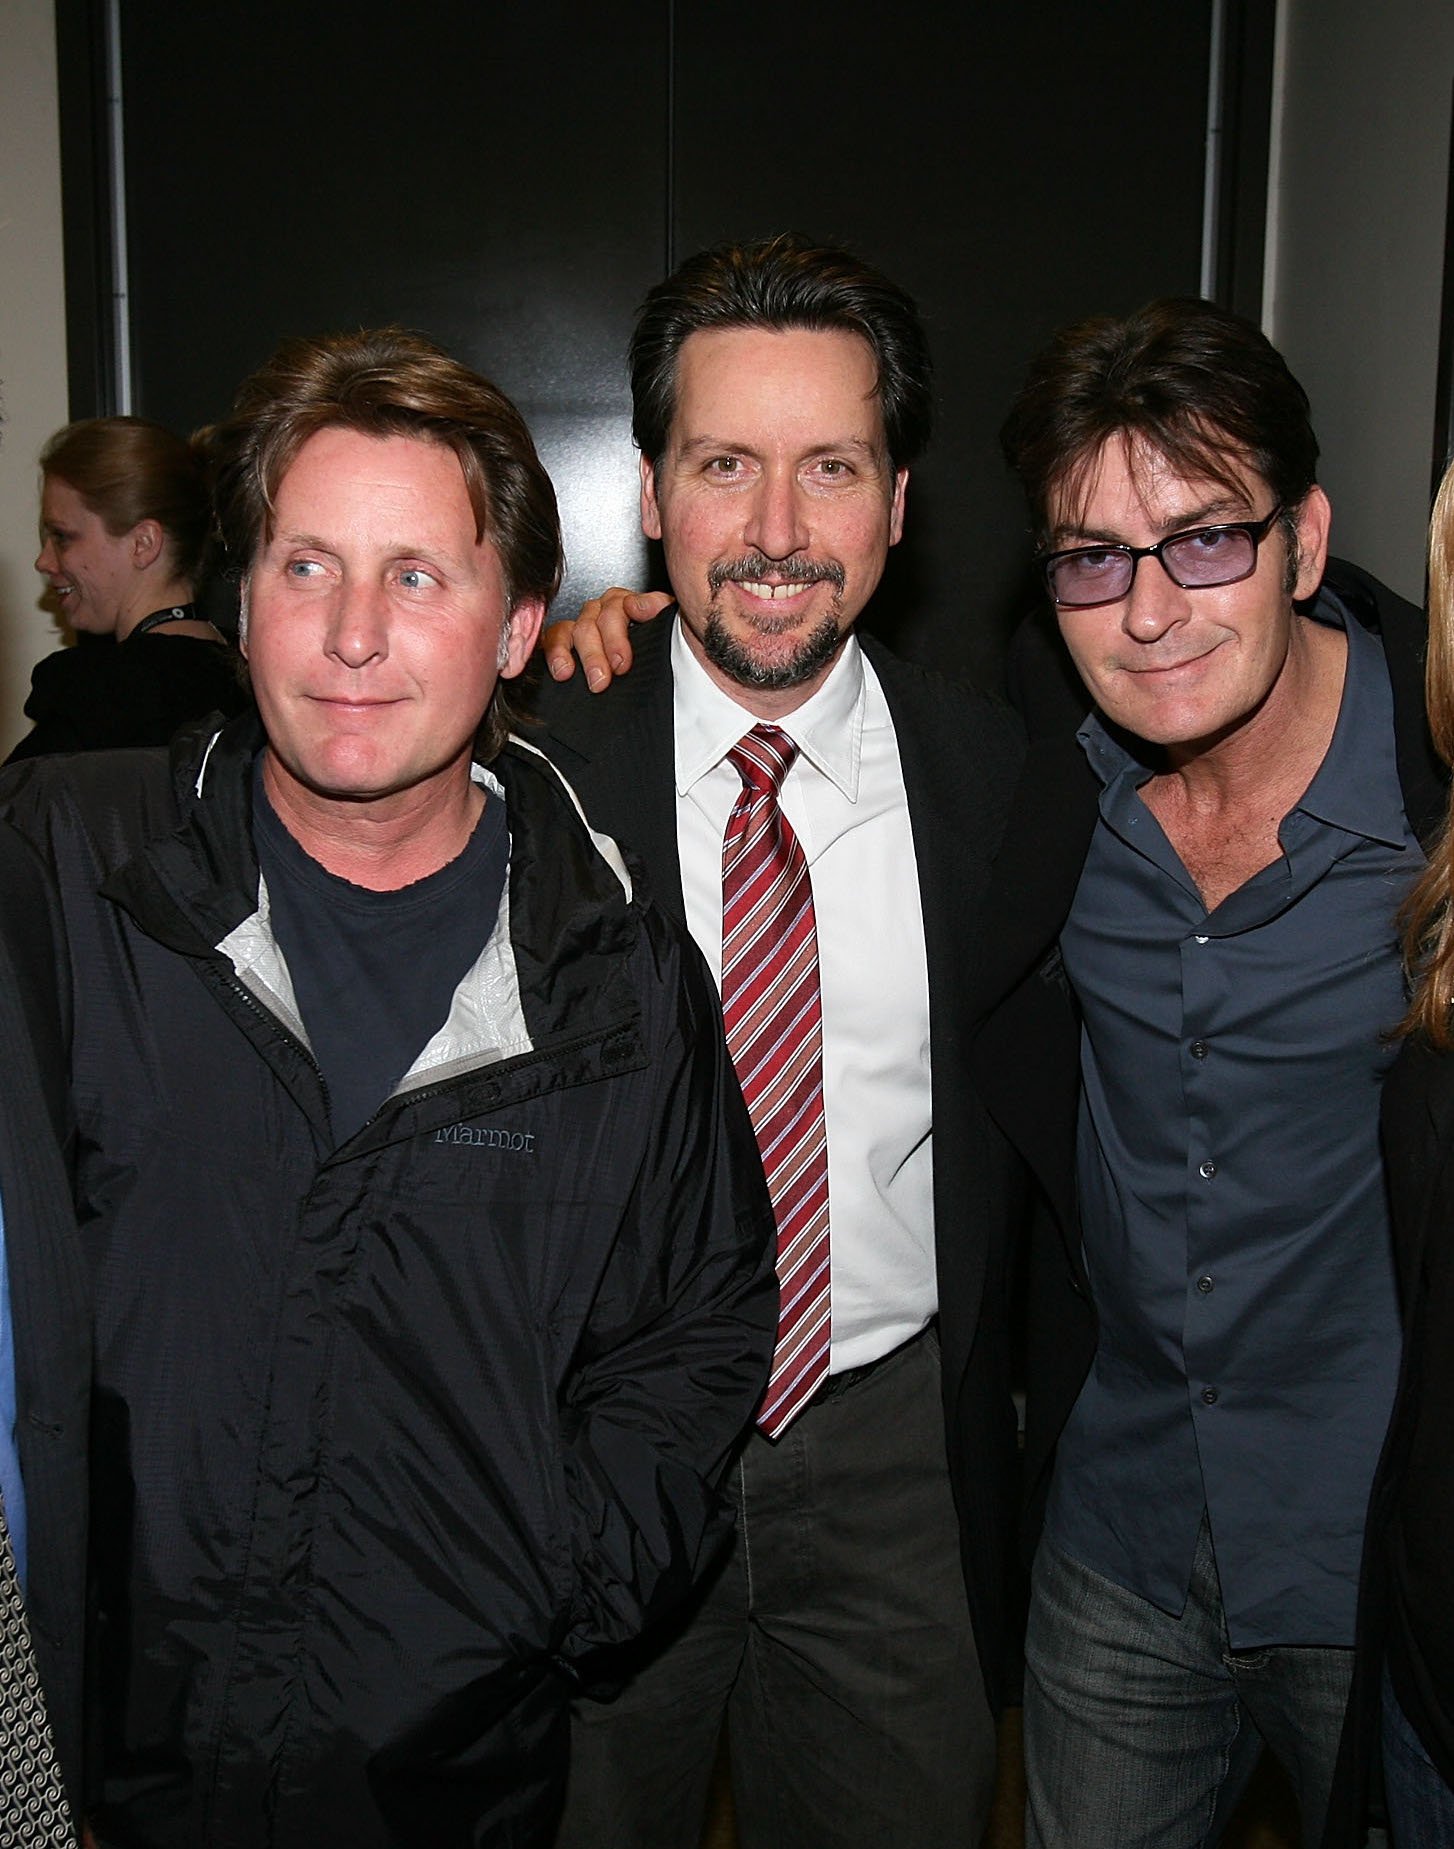 Emilio Estevez, Martin Sheen and Ramon Estevez during the amfAR Cinema Against AIDS held at The Carlu during the Toronto International Film Festival on September 12, 2010 in Toronto, Canada.  | Source: Getty Images